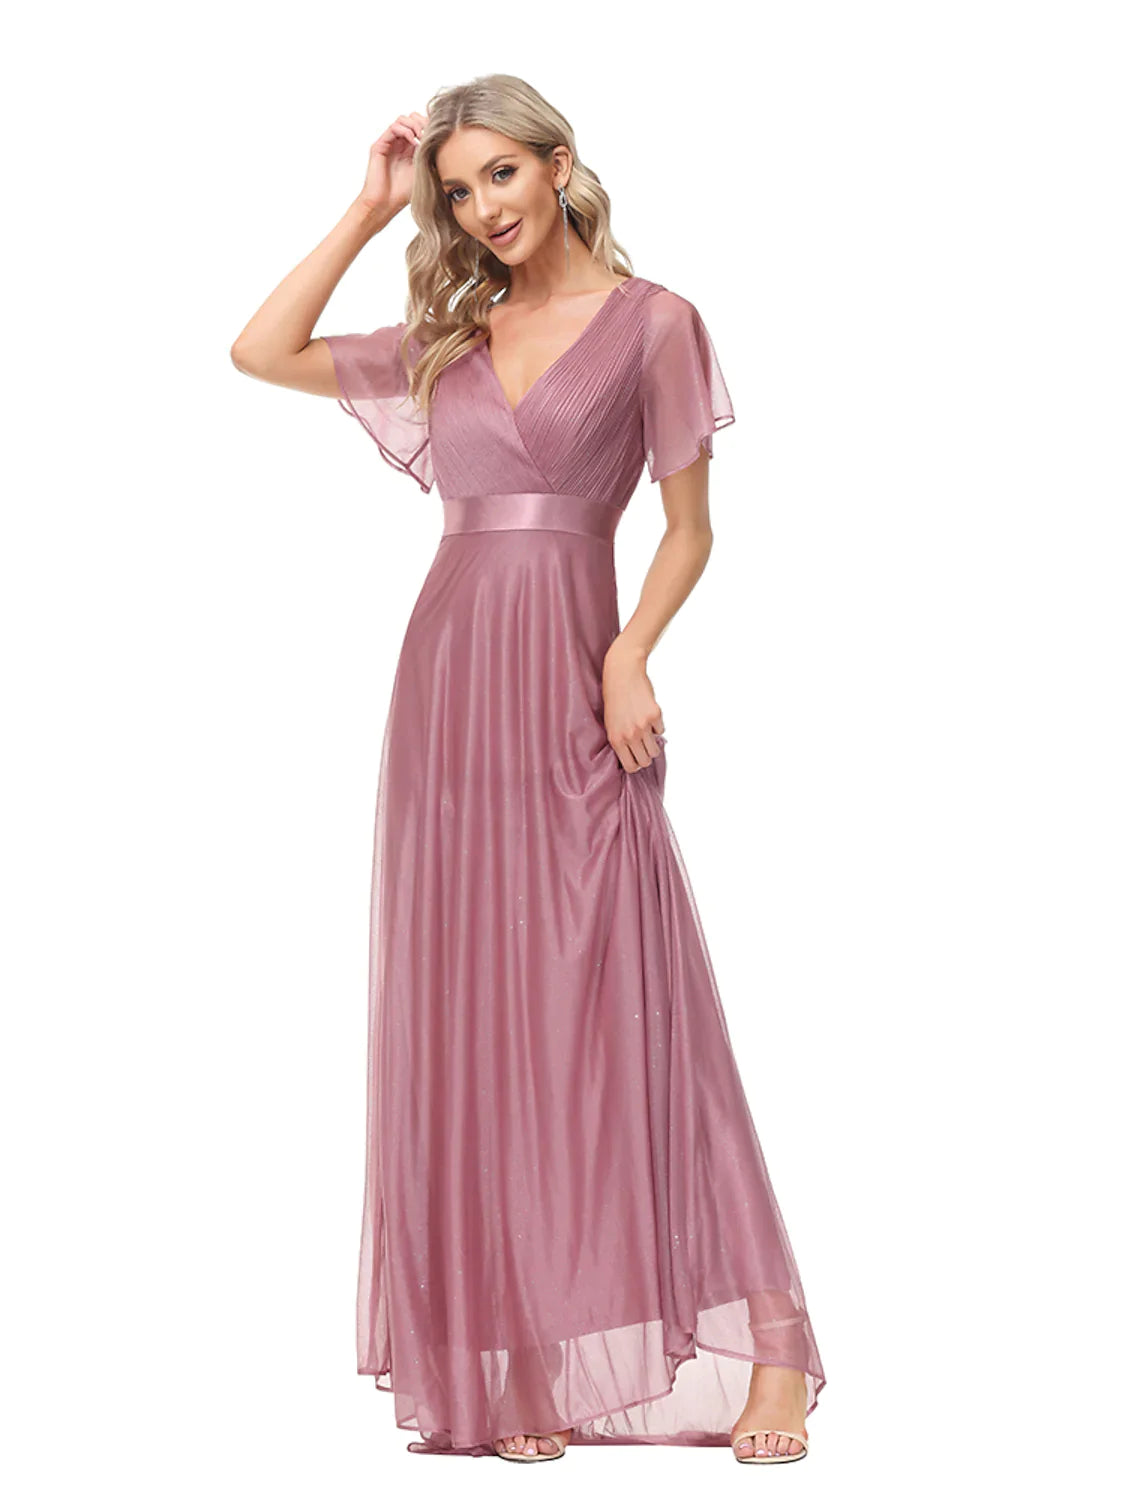 A-Line Evening Gown Dress Wedding Floor Length Short Sleeve V Neck Tulle with Ruched Ruffles